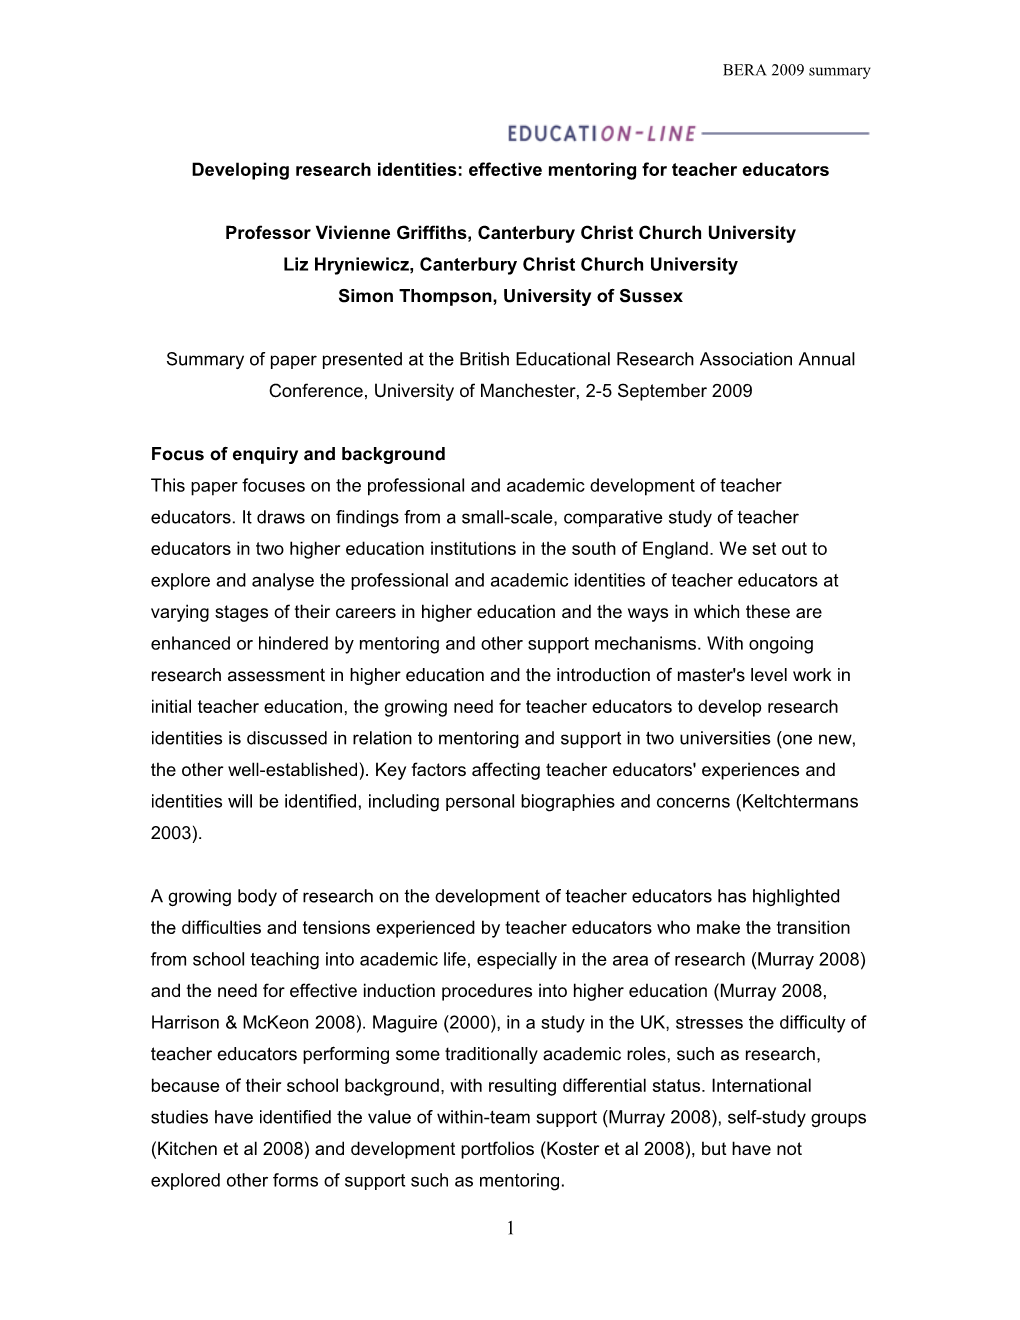 Developing Research Identities: Effective Mentoring for Teacher Educators